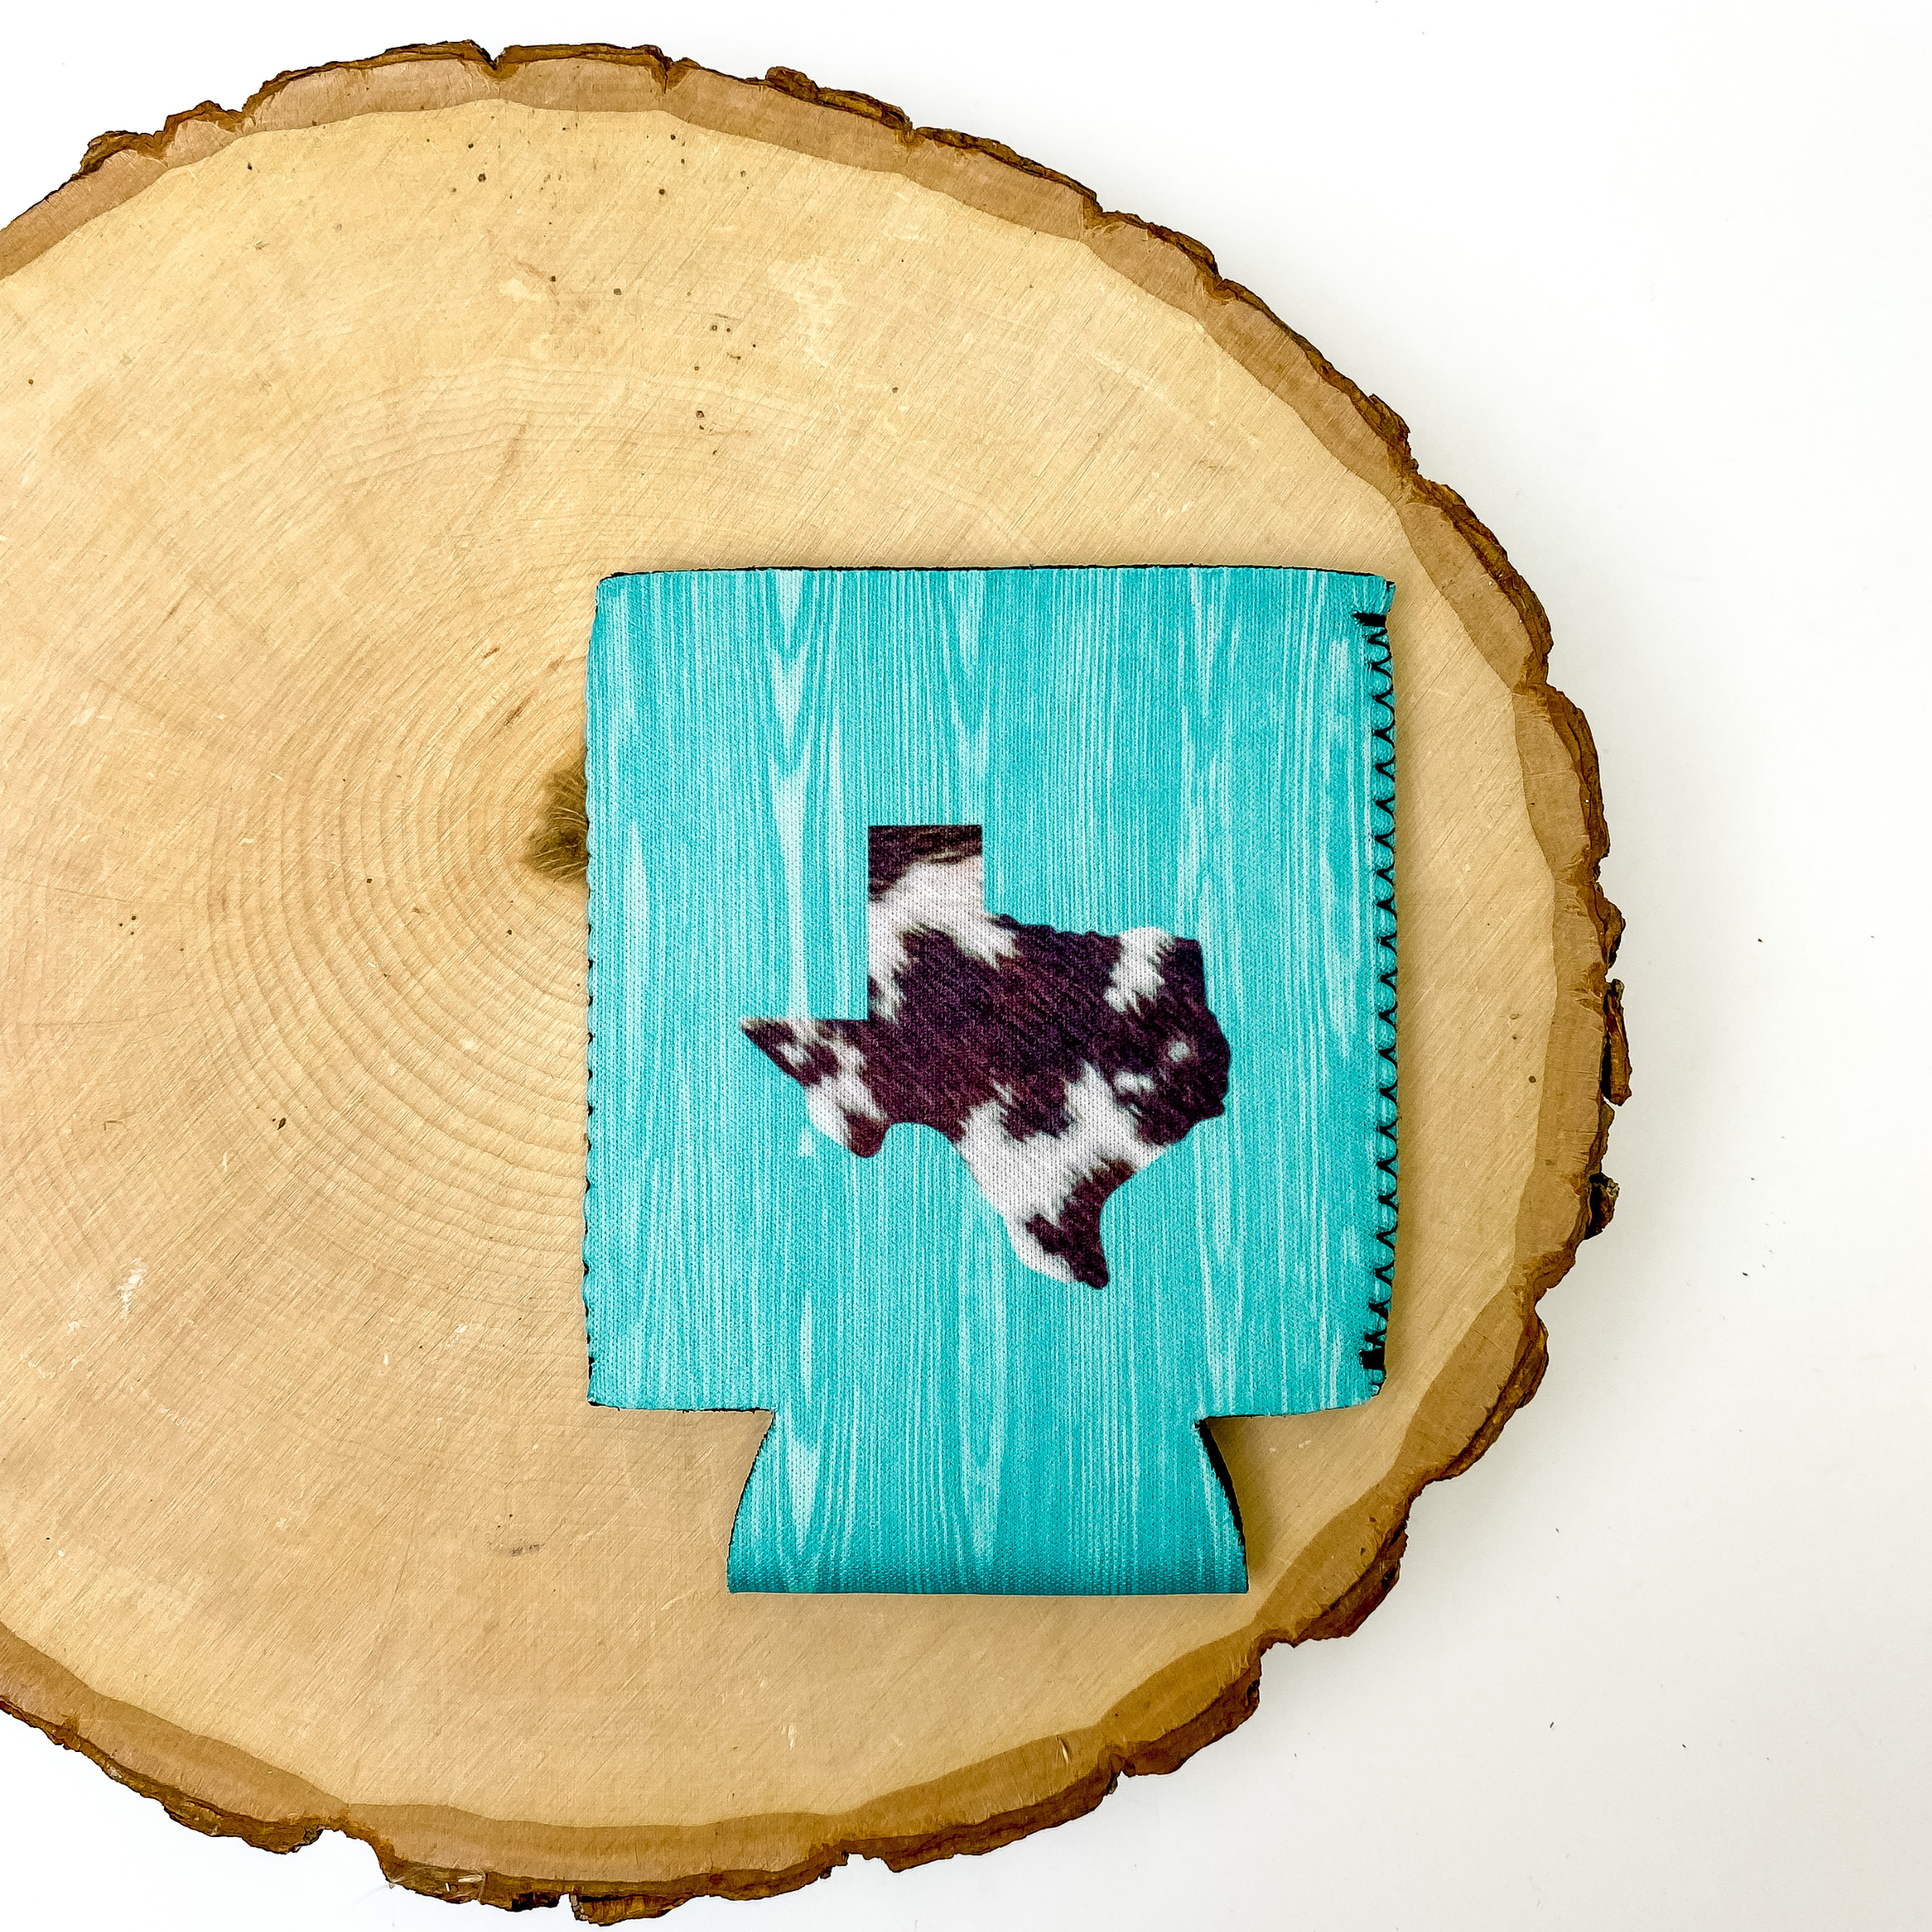 Turquoise wooden print on the background and a cow print texas in the middle of koozie. This koozie is pictured on a piece of wood on a white background.